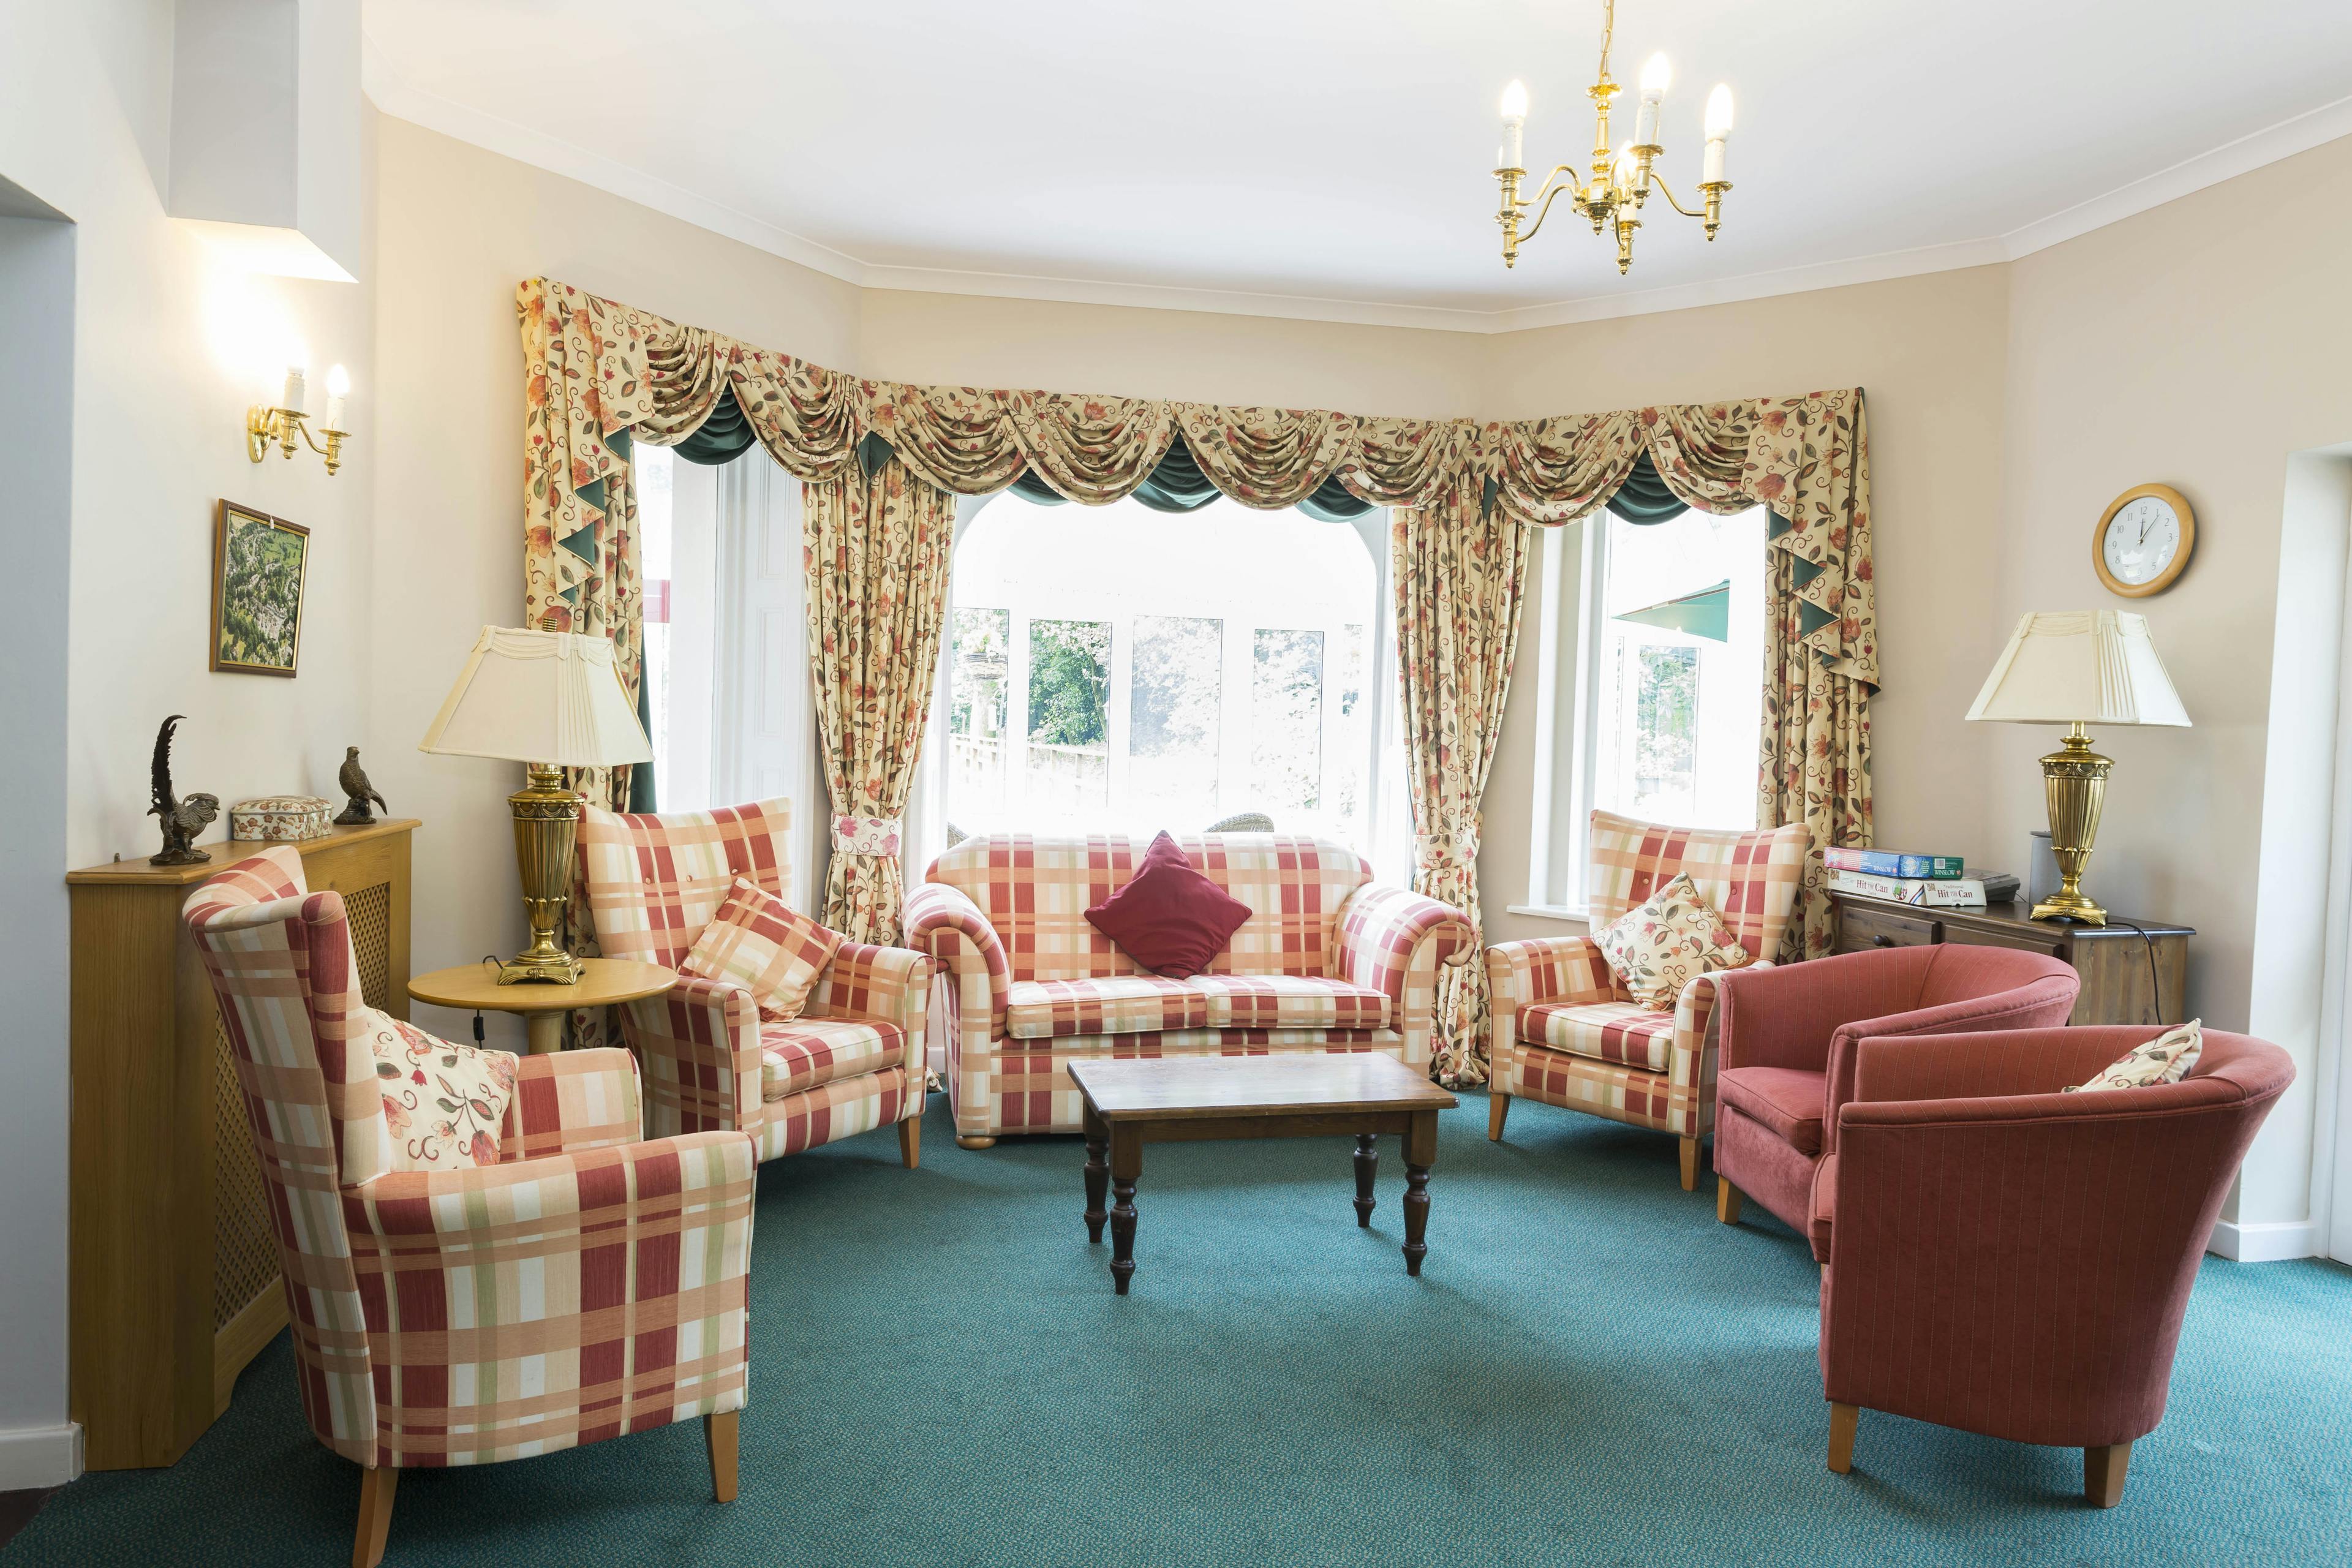 Communal Lounge of Prestbury Beaumont Care Home in Macclesfield, Cheshire